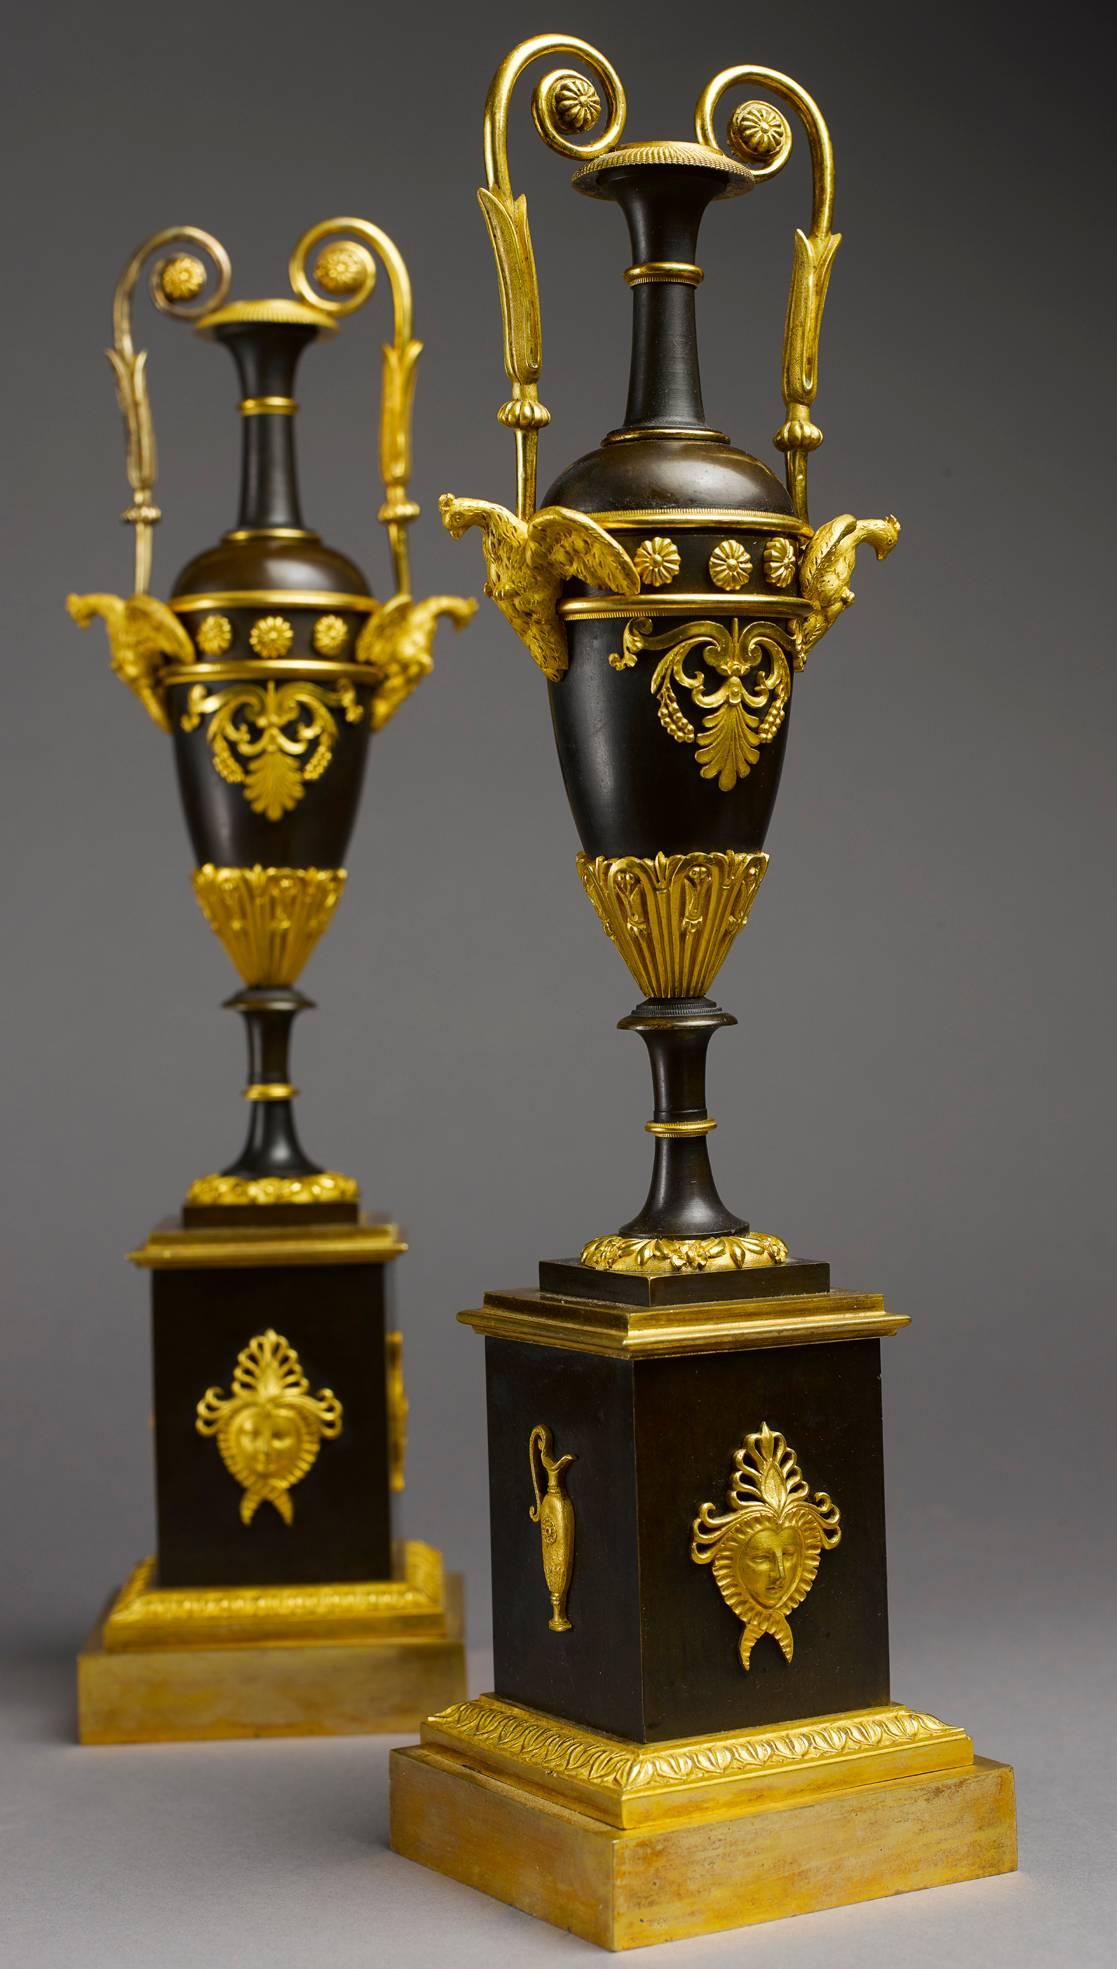 A very fine pair of gilt and patinated Empire period bronze vases, France, circa 1820. Because of their quality, theses vases come very likely from the workshop of one of the most renowned Parisian bronziers of the time, like Claude Galle or